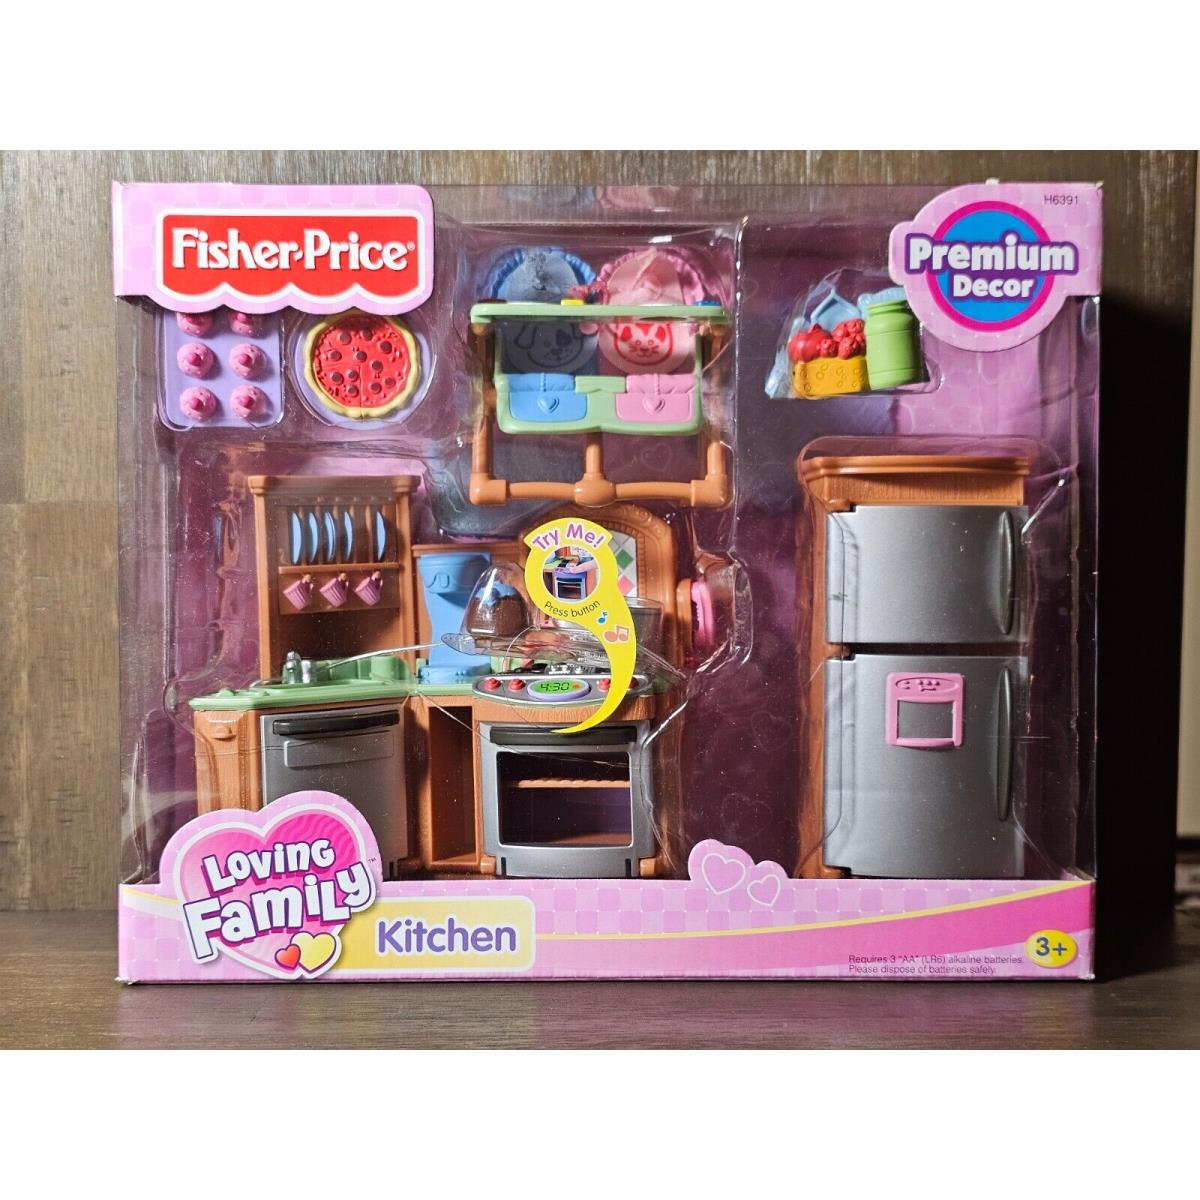 Fisher Price Loving Family Dollhouse Kitchen Stove Refrigerator Highchairs 2005